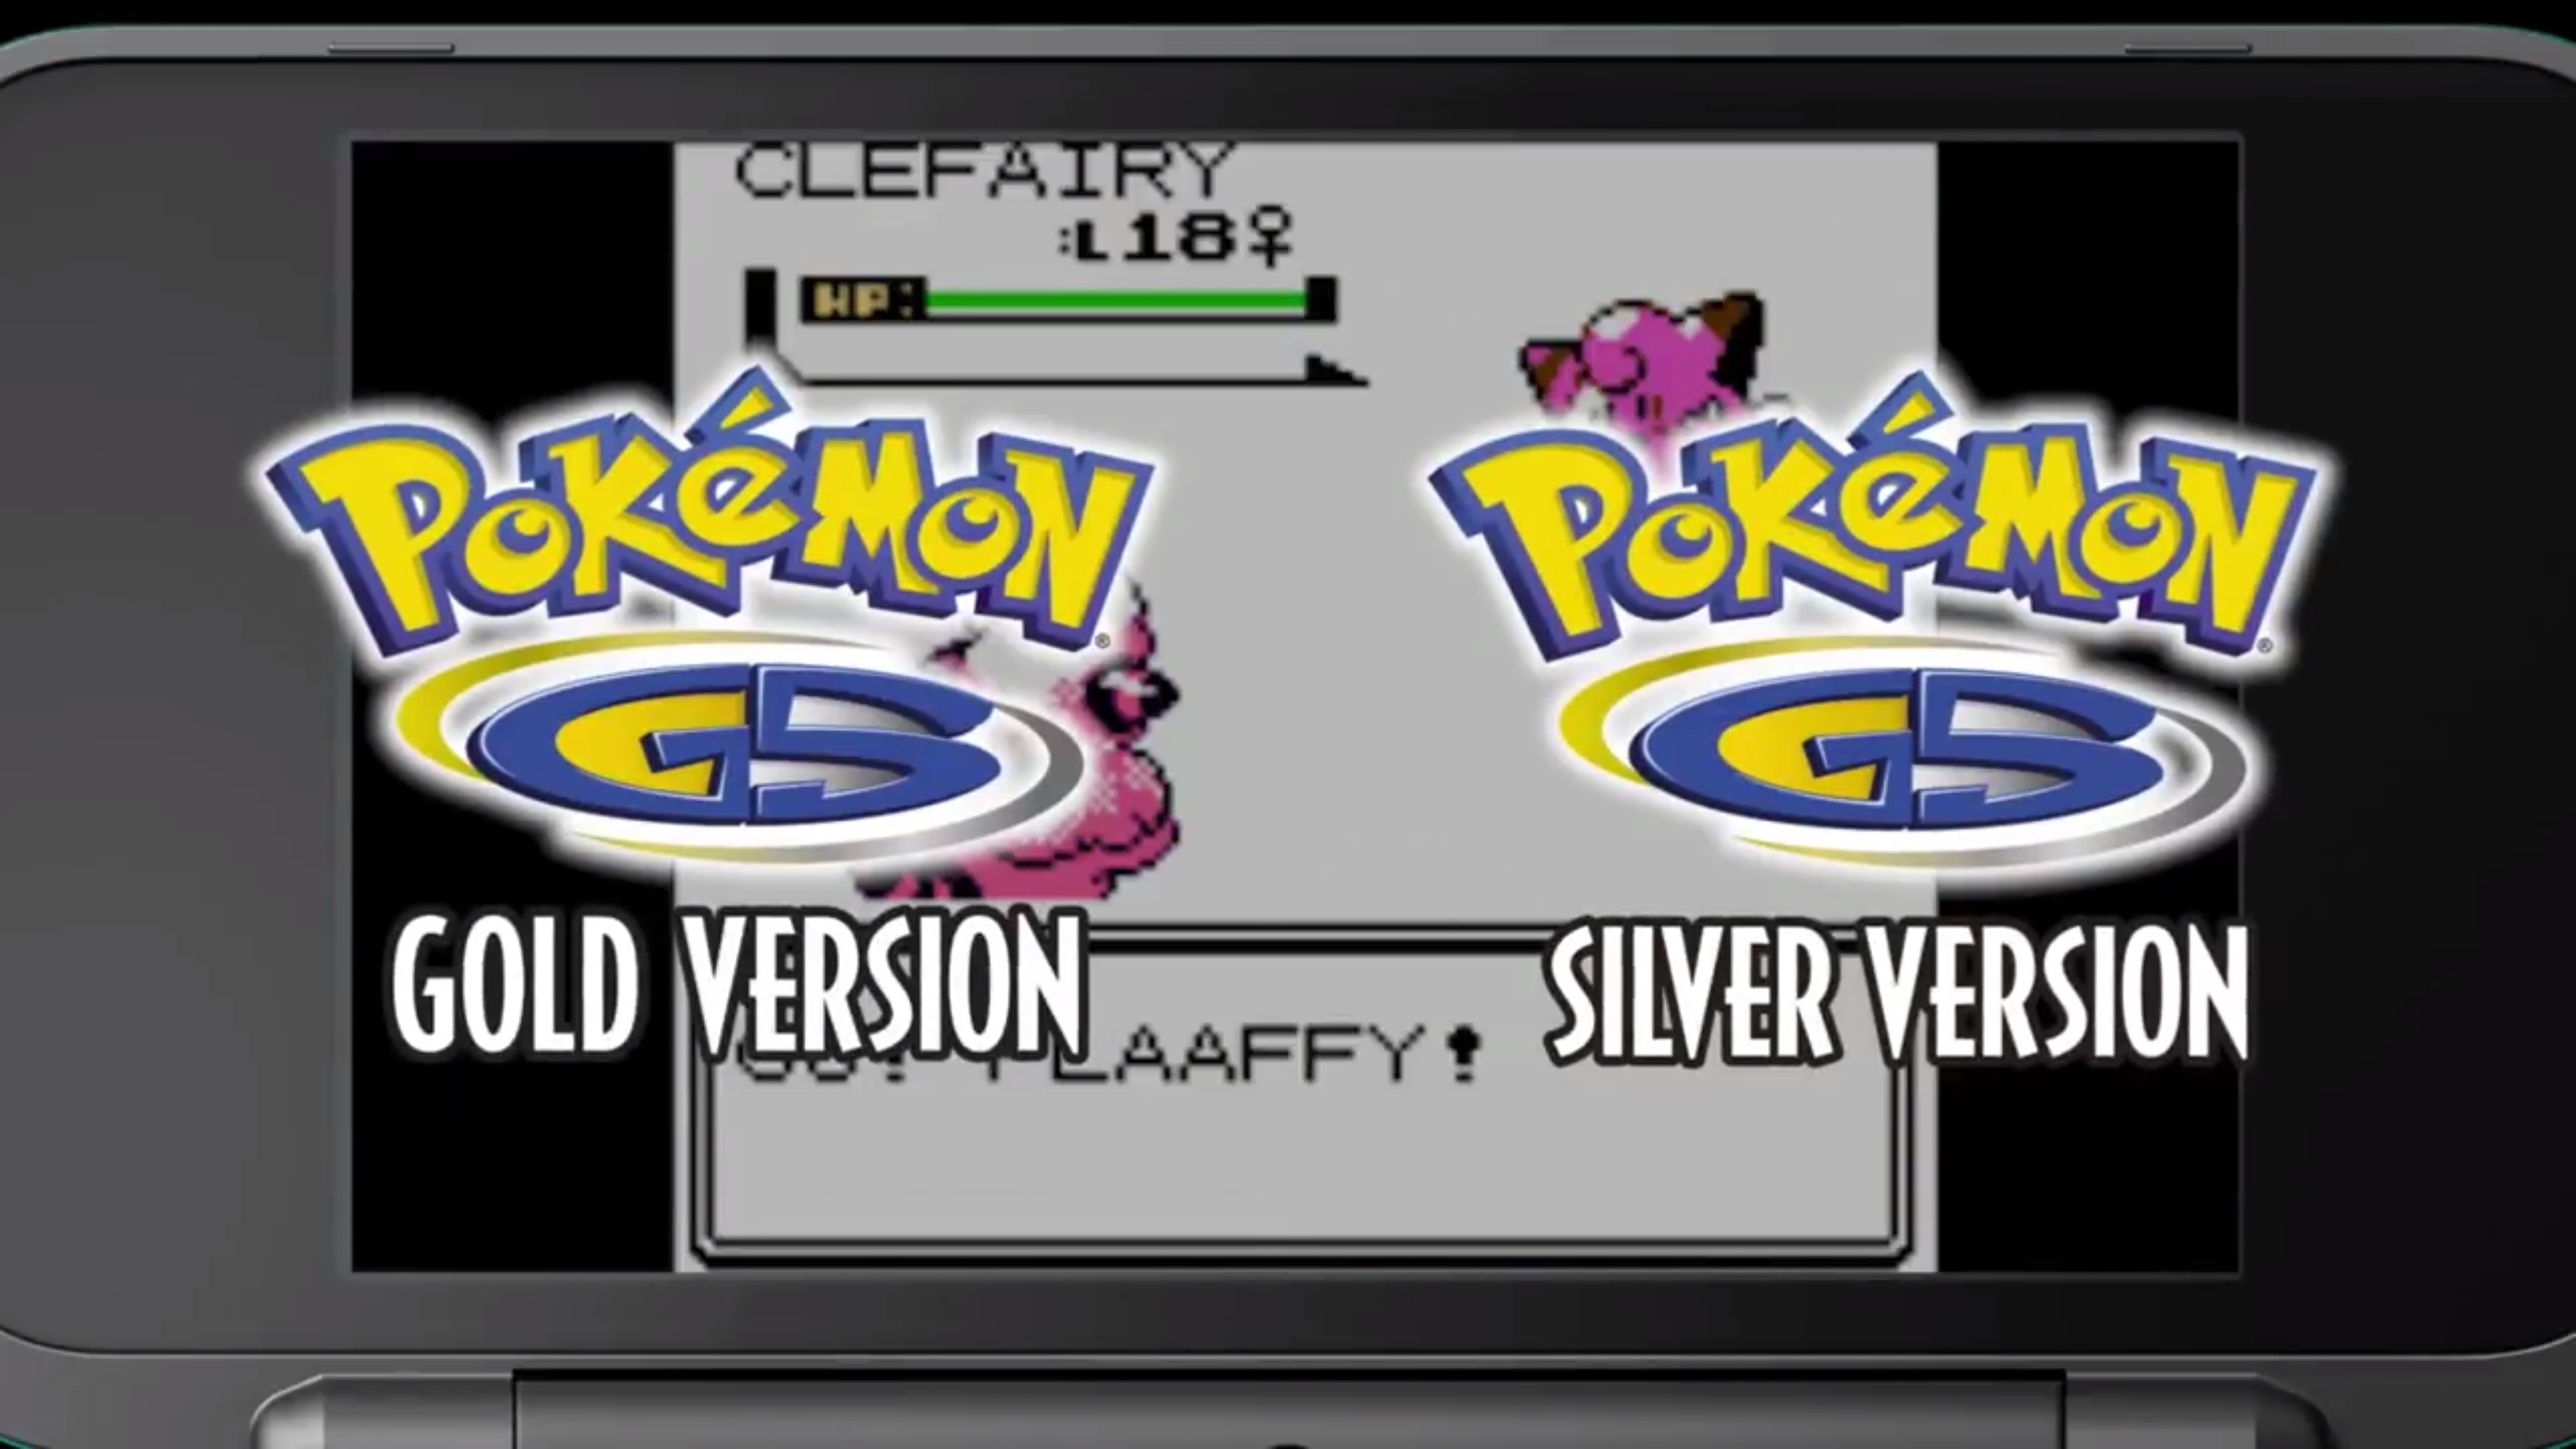 3840x2160 Nintendo just went live with a trailer promoting the launch of Pokemon Gold  and Pokemon Silver on the 3DS Virtual Console later this month. Watch it  below.